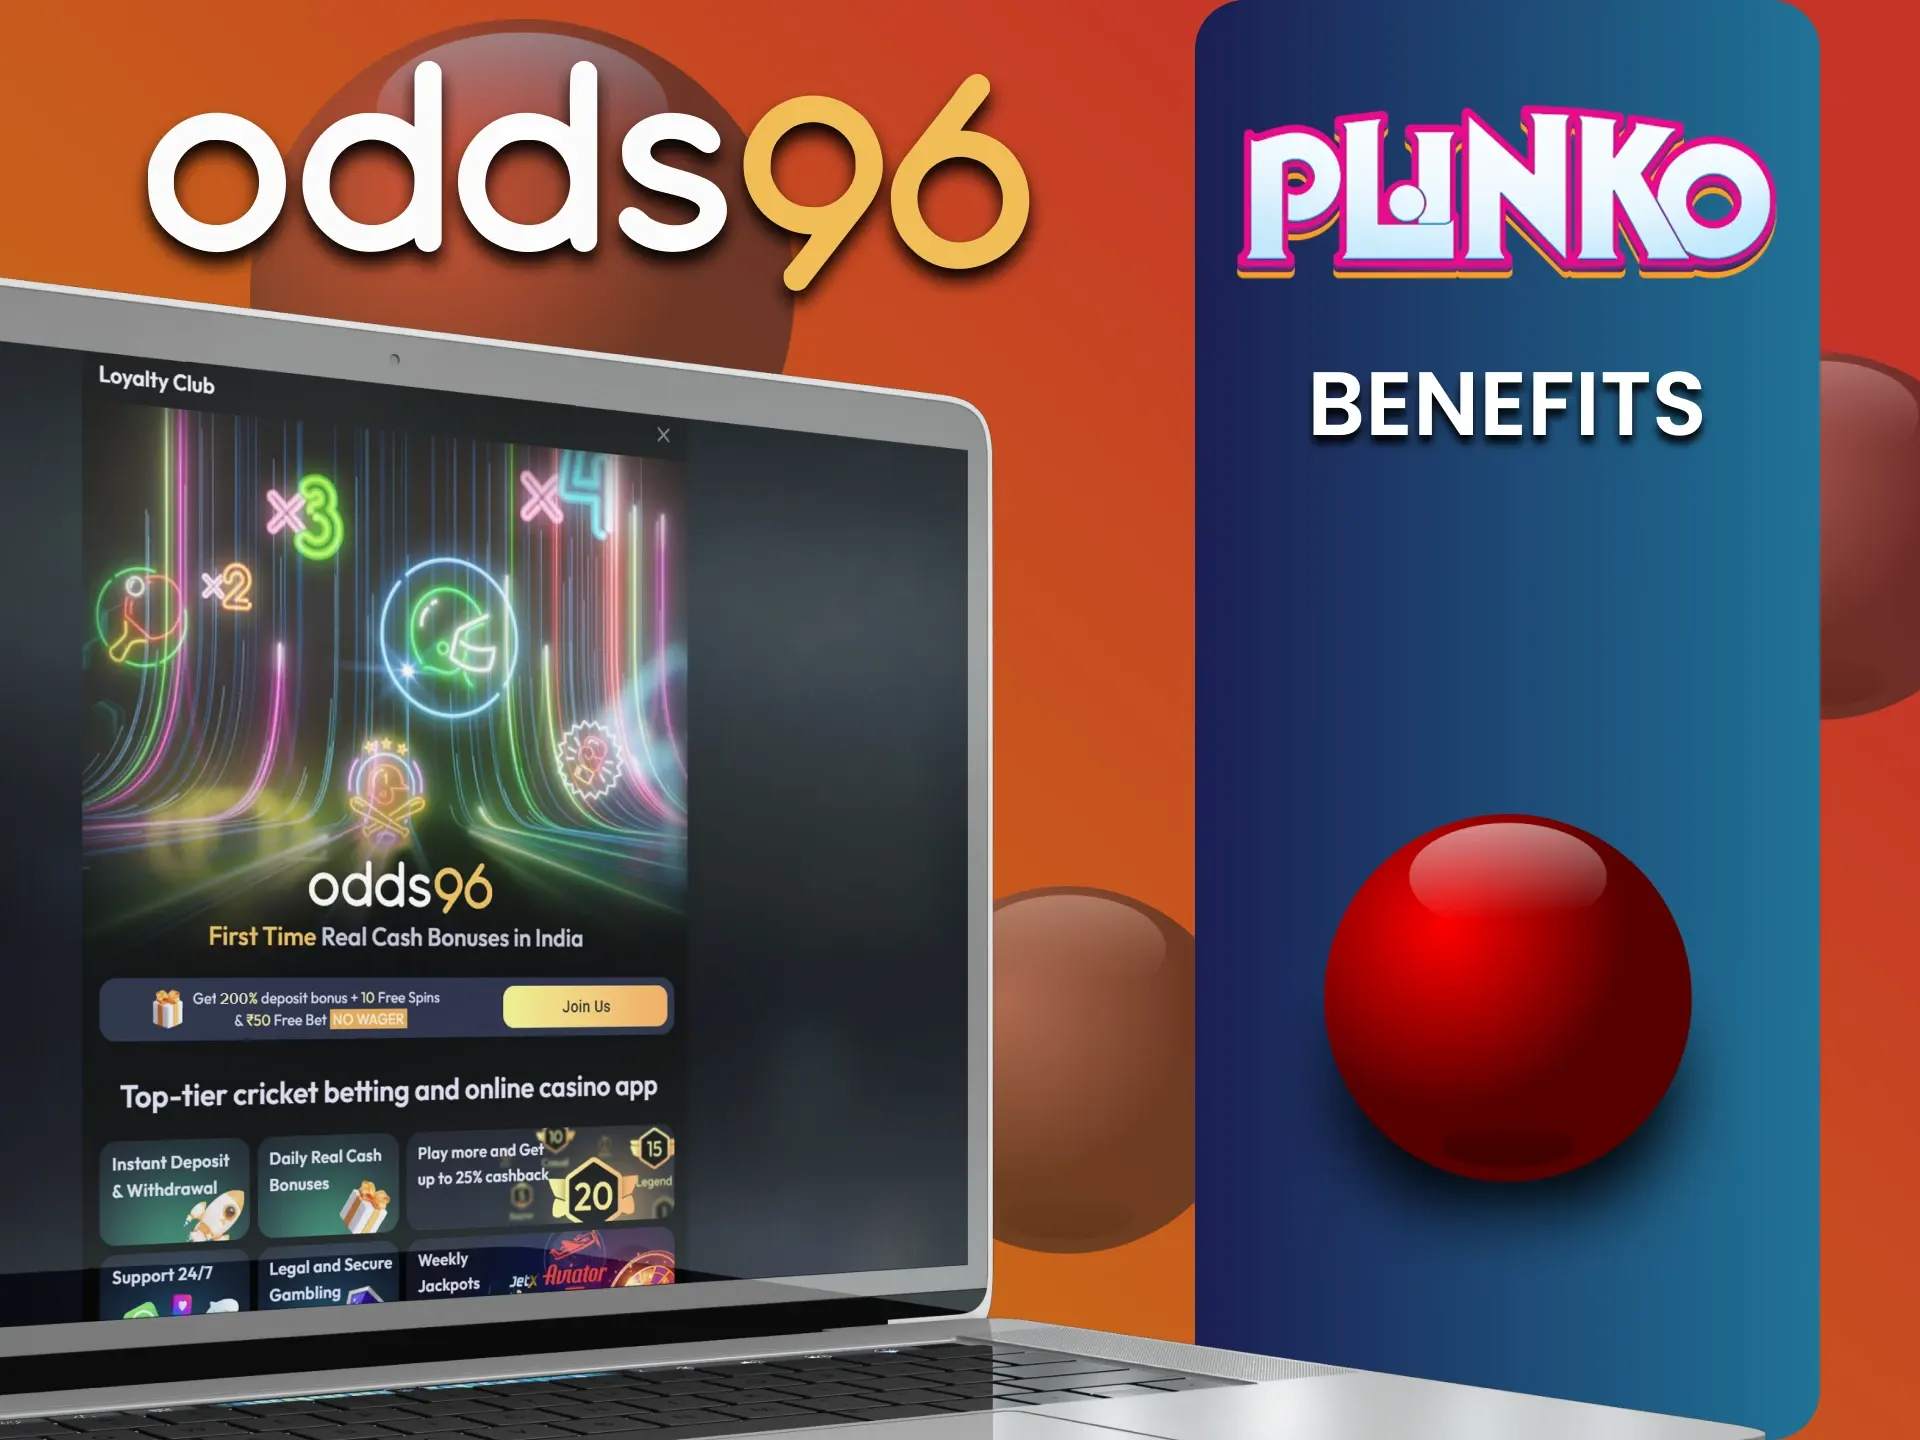 Odds96 has many advantages for Plinko.